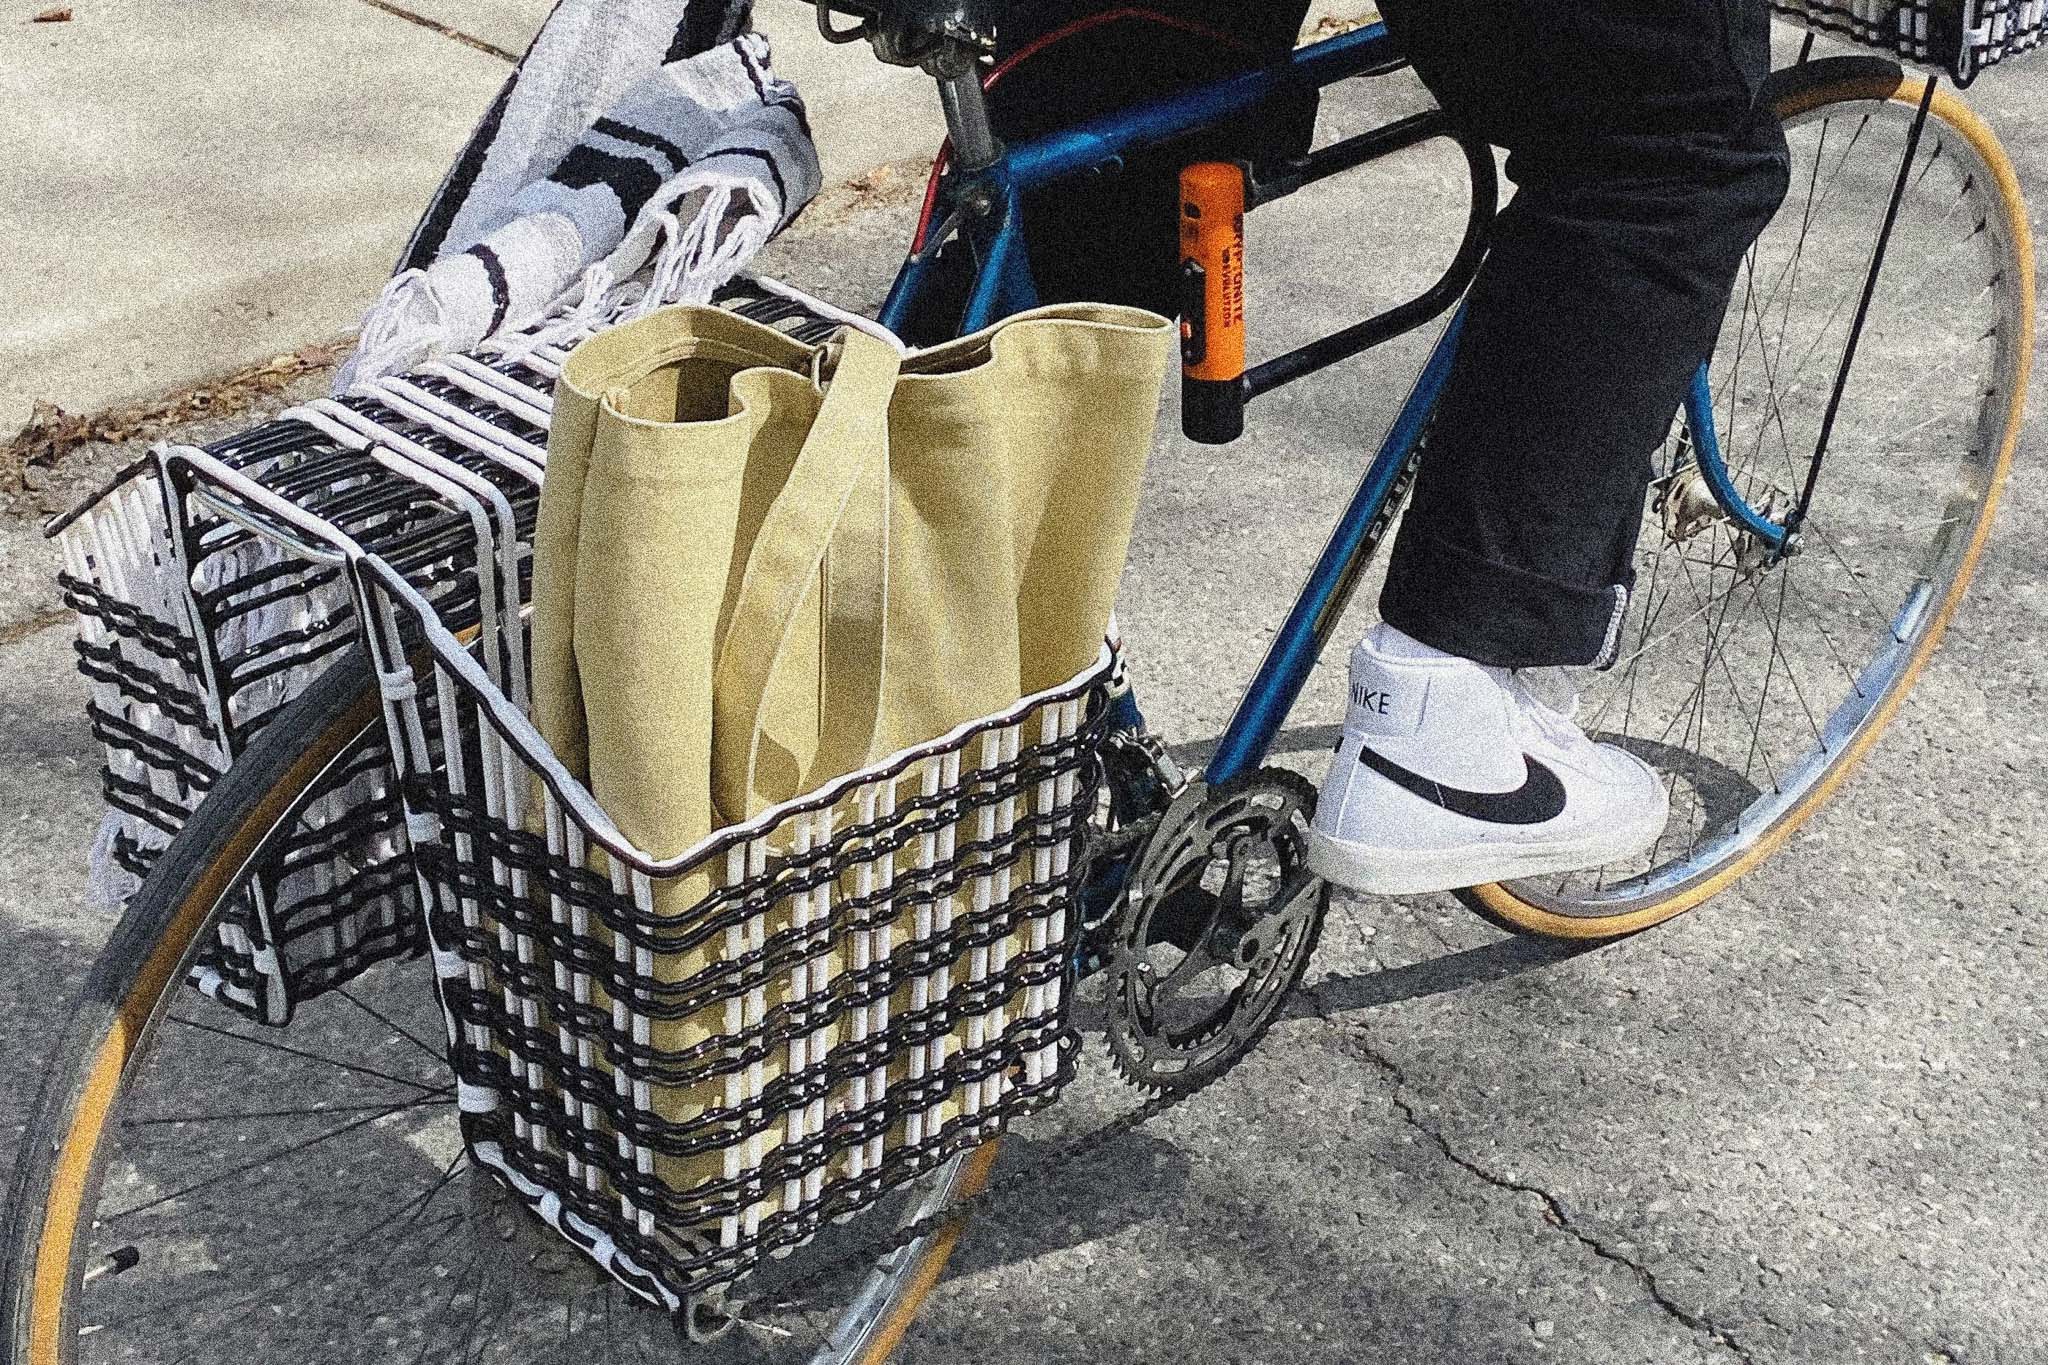 A close-up image of rear bike baskets on a bike. The basket is woven black and white plastic, resembling a textile. One basket is holding a canvas bag.